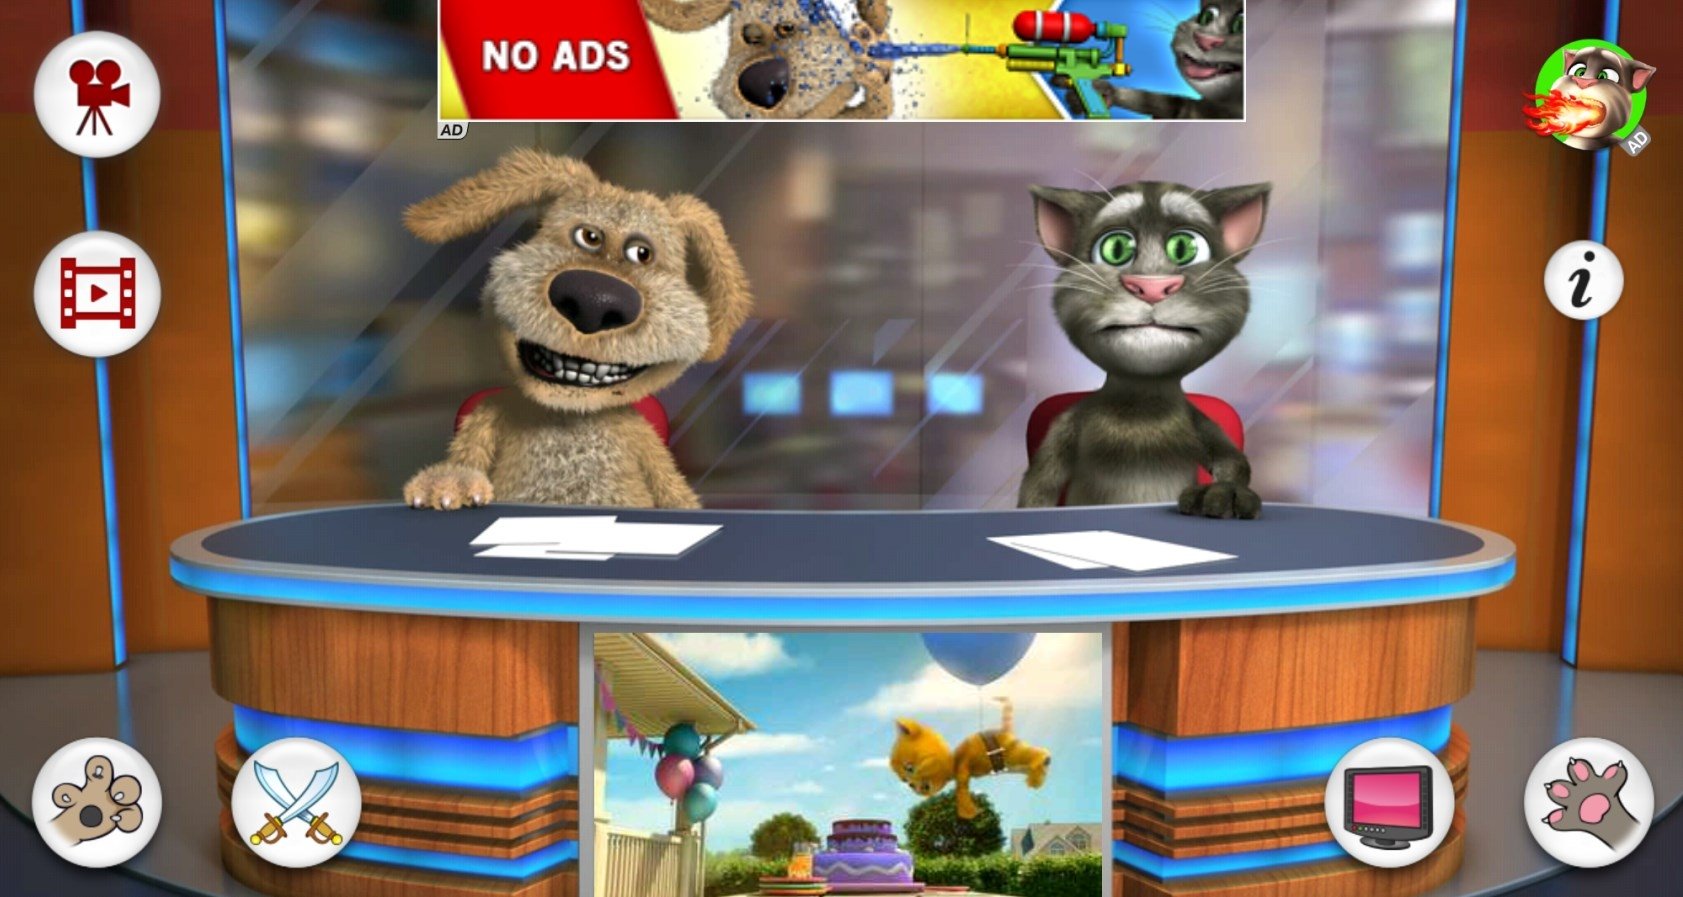 Talking Tom & Ben News MOD + data for Android 